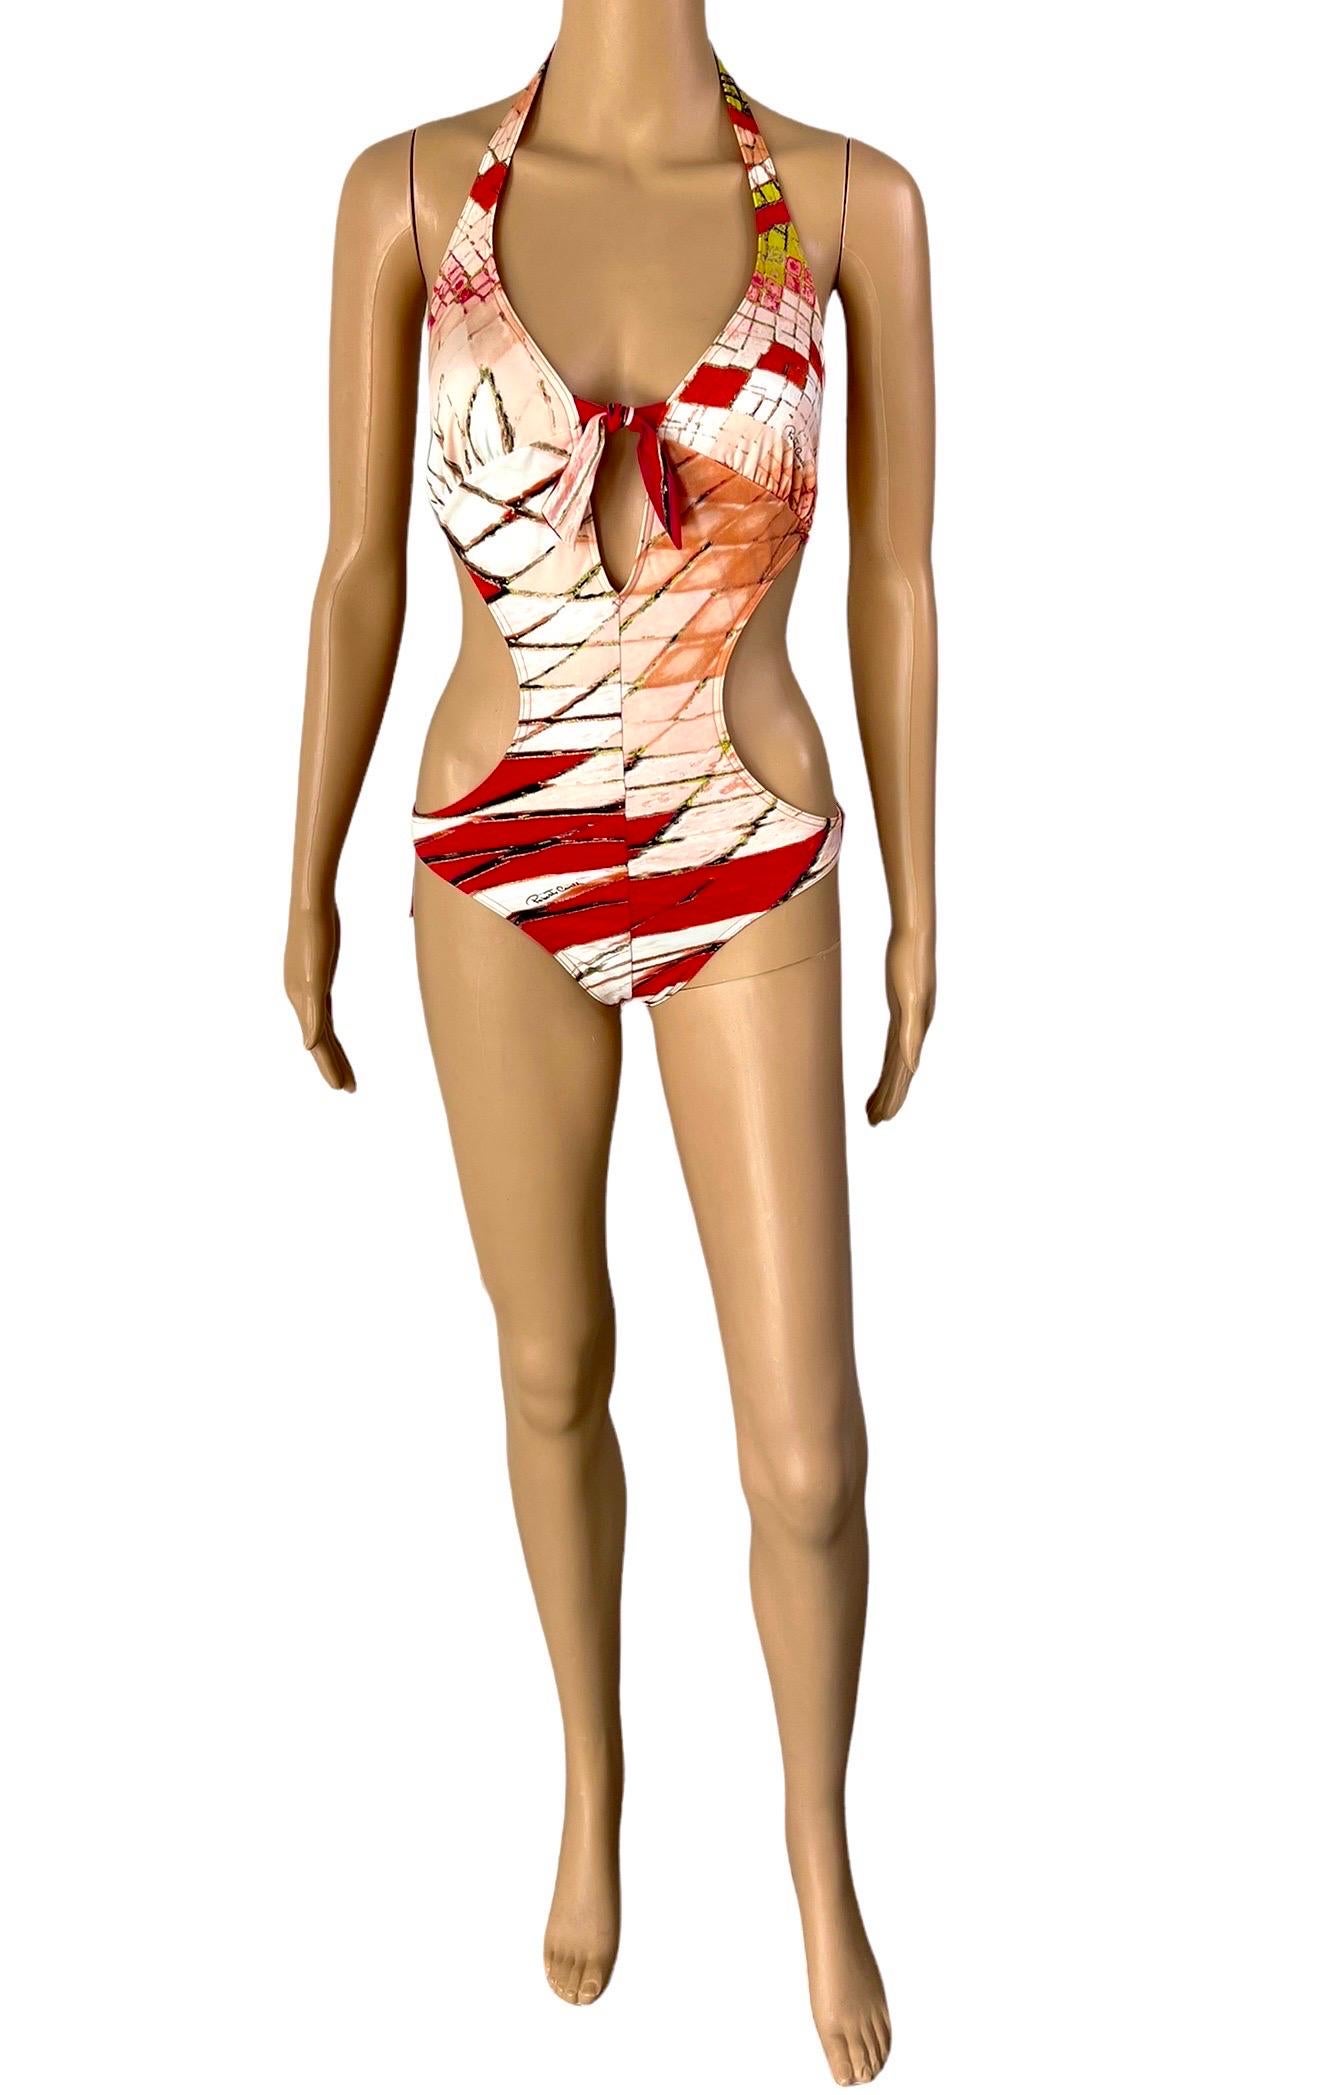 Roberto Cavalli S/S 2004 Plunging Cutout One Piece Bodysuit Swimwear Swimsuit In Excellent Condition For Sale In Naples, FL